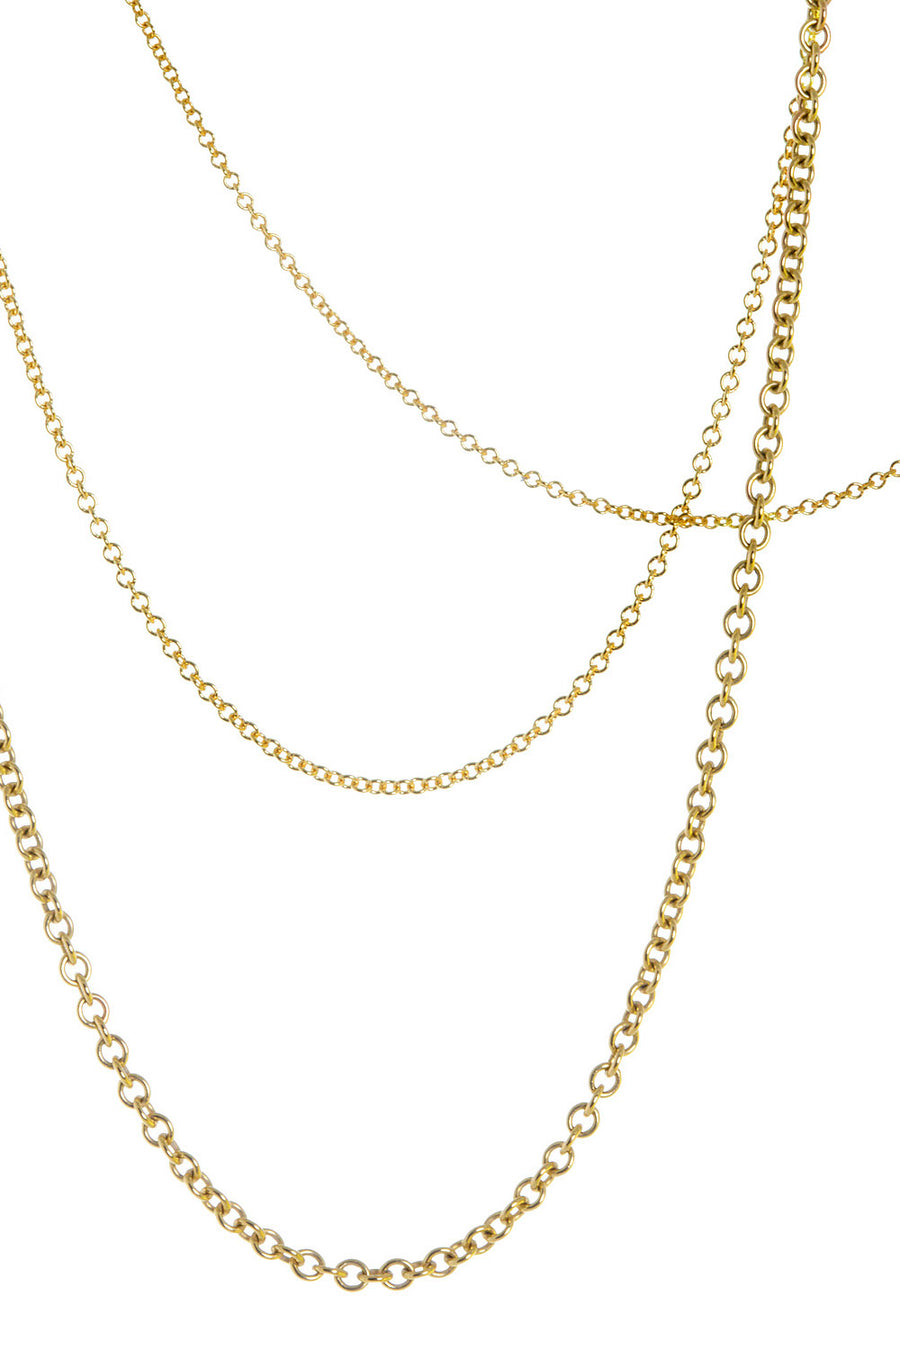 1.3mm Cable Chain in 14k gold | 20"